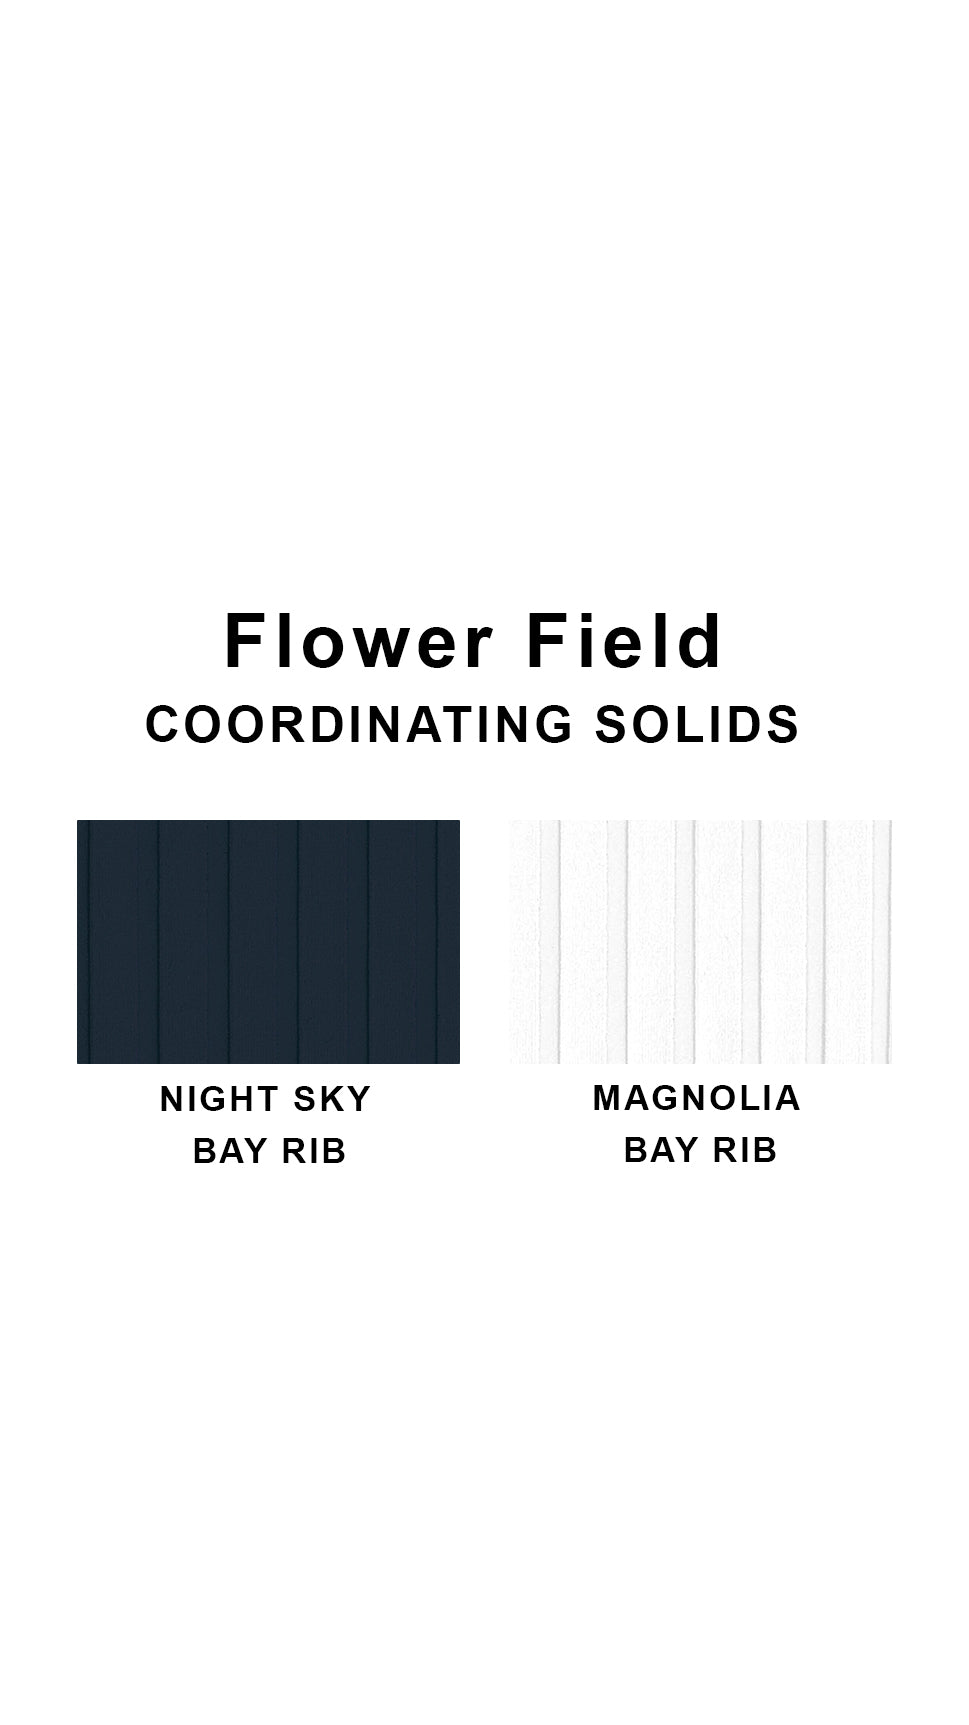 Coordinating solids chart for Flower Field swimsuit print: Night Sky Bay Rib and Magnolia Bay Rib